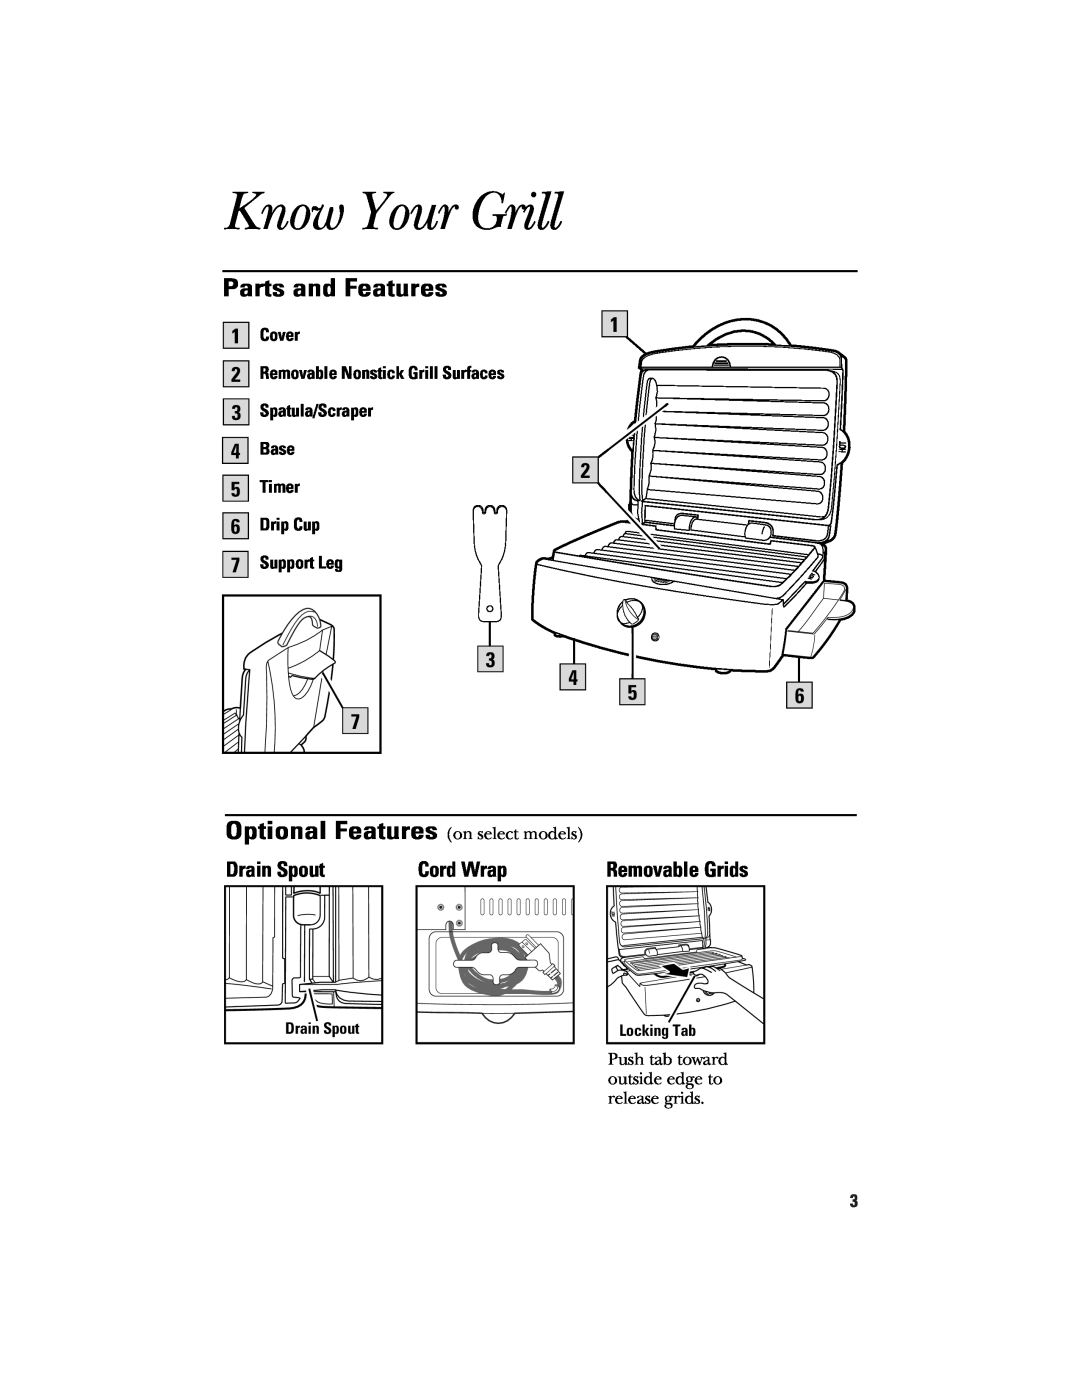 GE 106642 Know Your Grill, Parts and Features, Optional Features on select models, Drain Spout, Removable Grids, Cover 